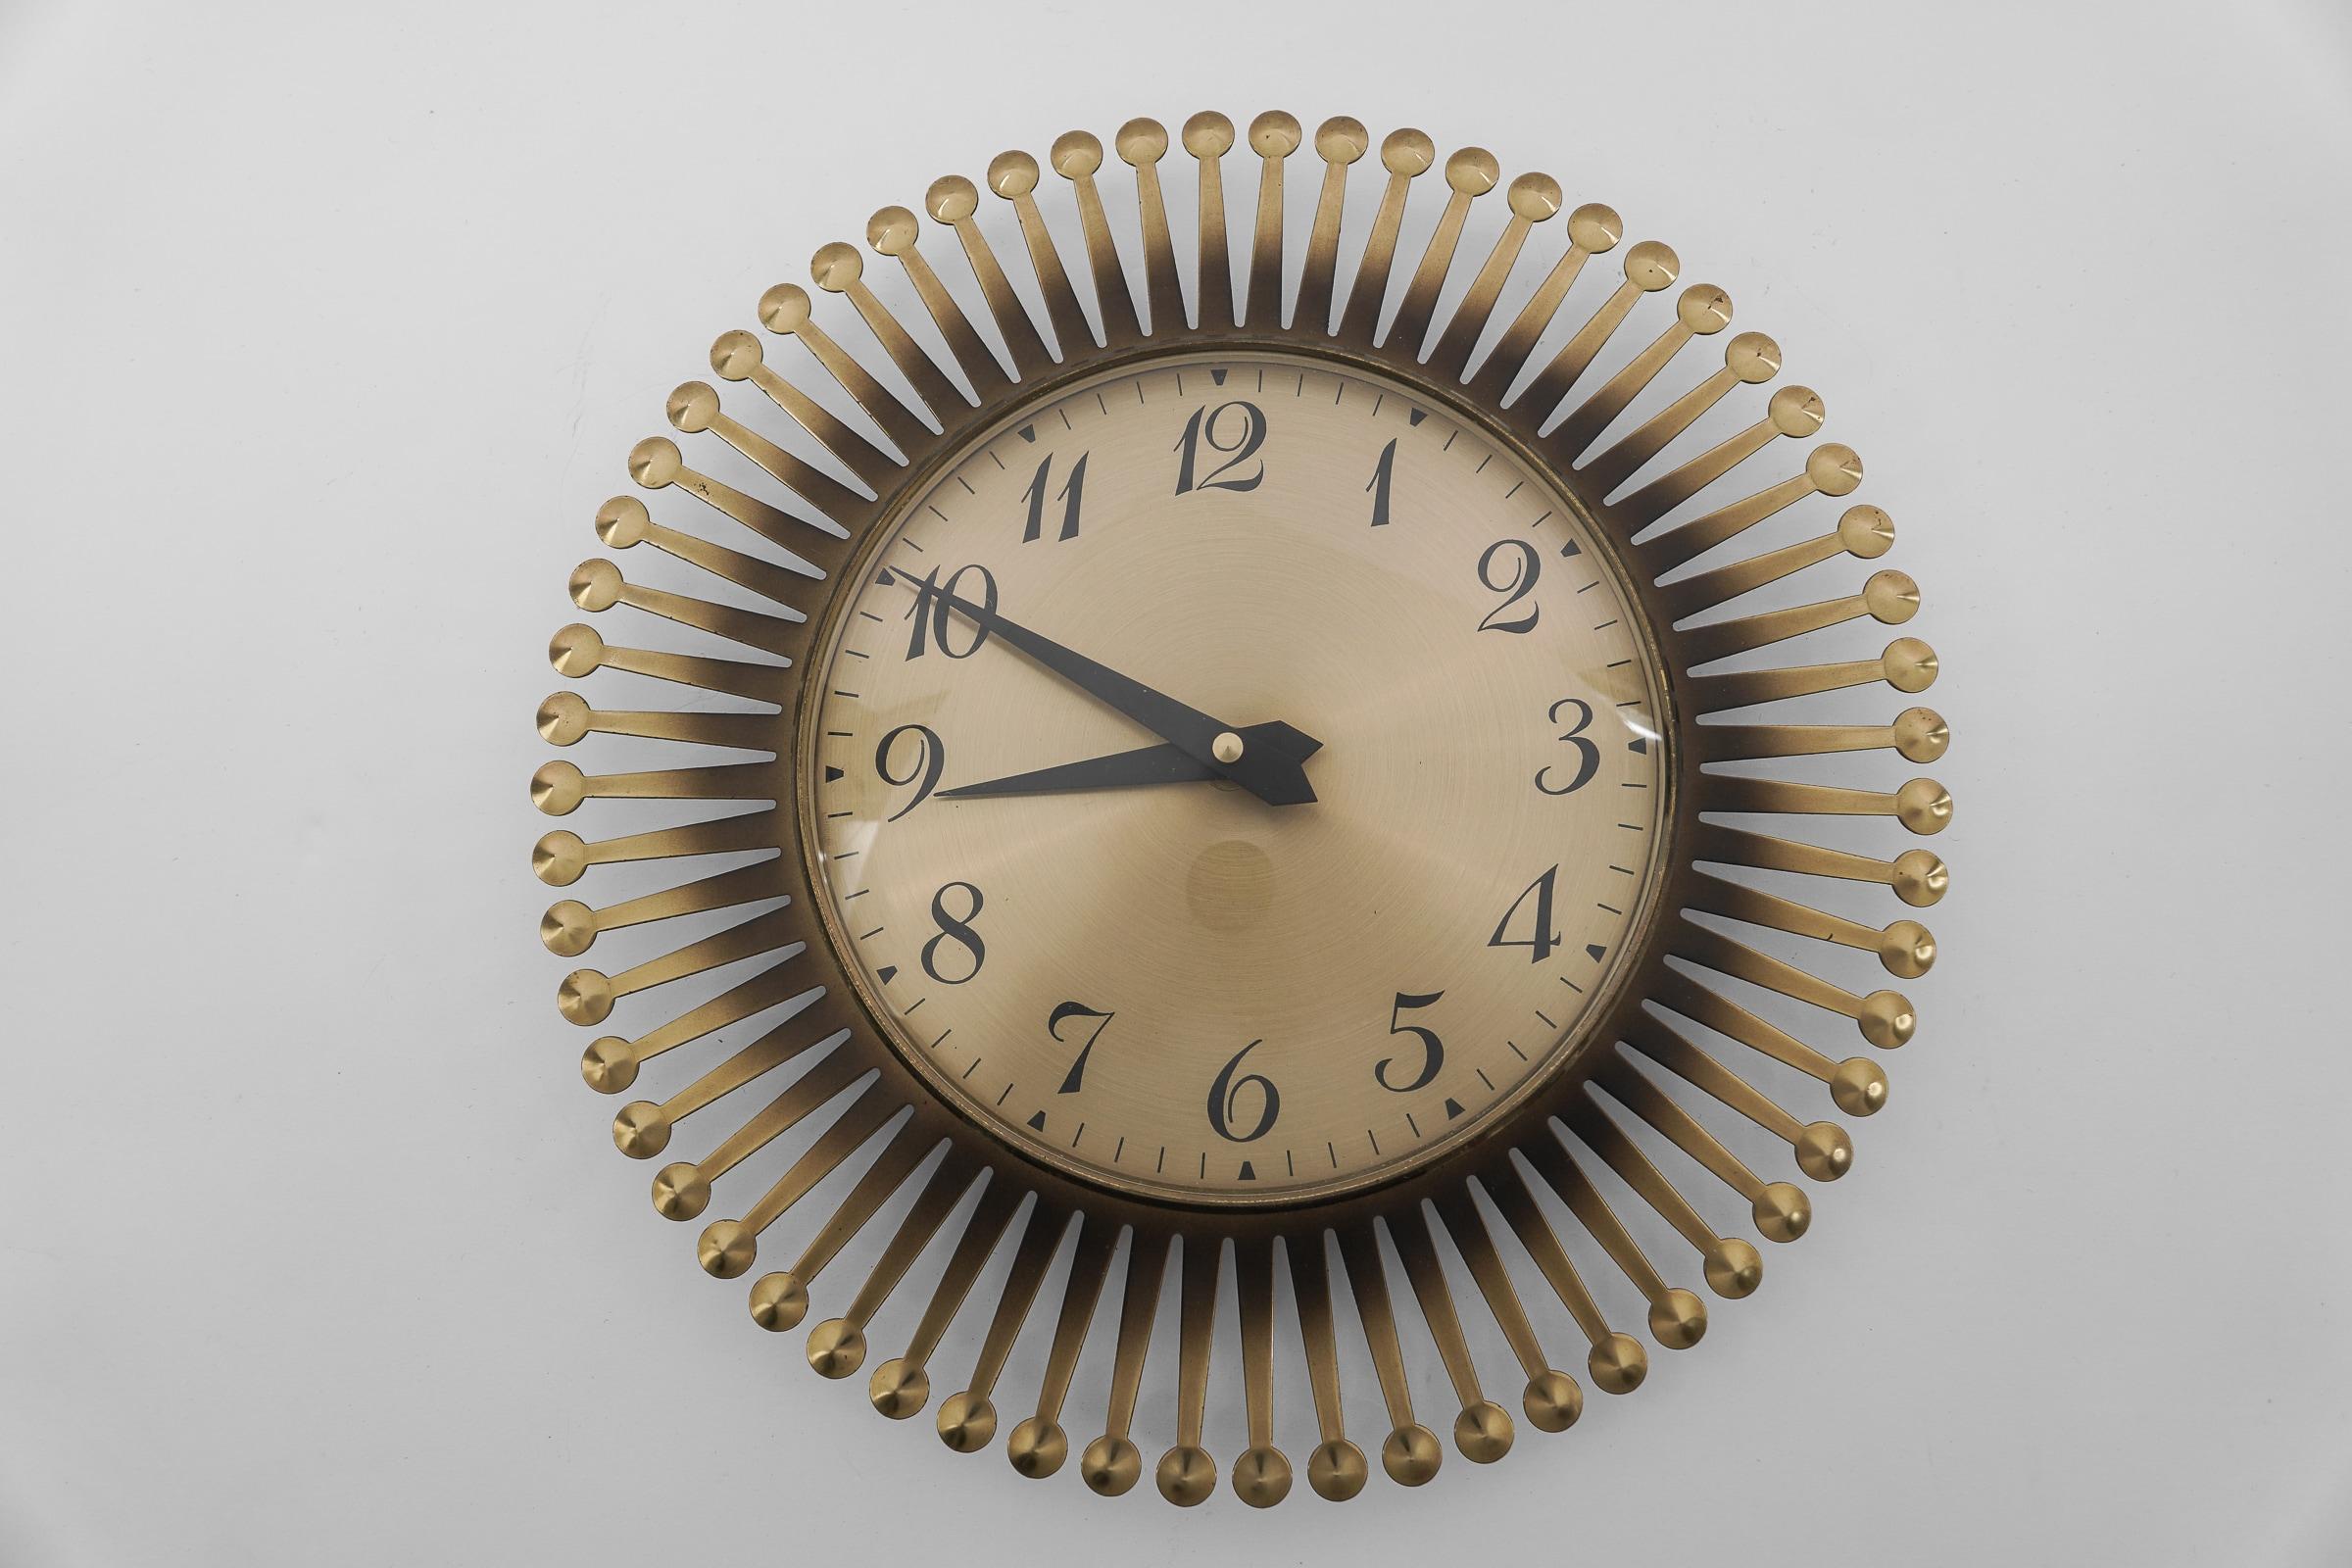 Stunning sunburst wall clock made of brass, metal and glass. 

One of the most beautiful models I have seen to date.

An eye catcher par excellence.

Made in Germany.

Electric, battery operated clock.